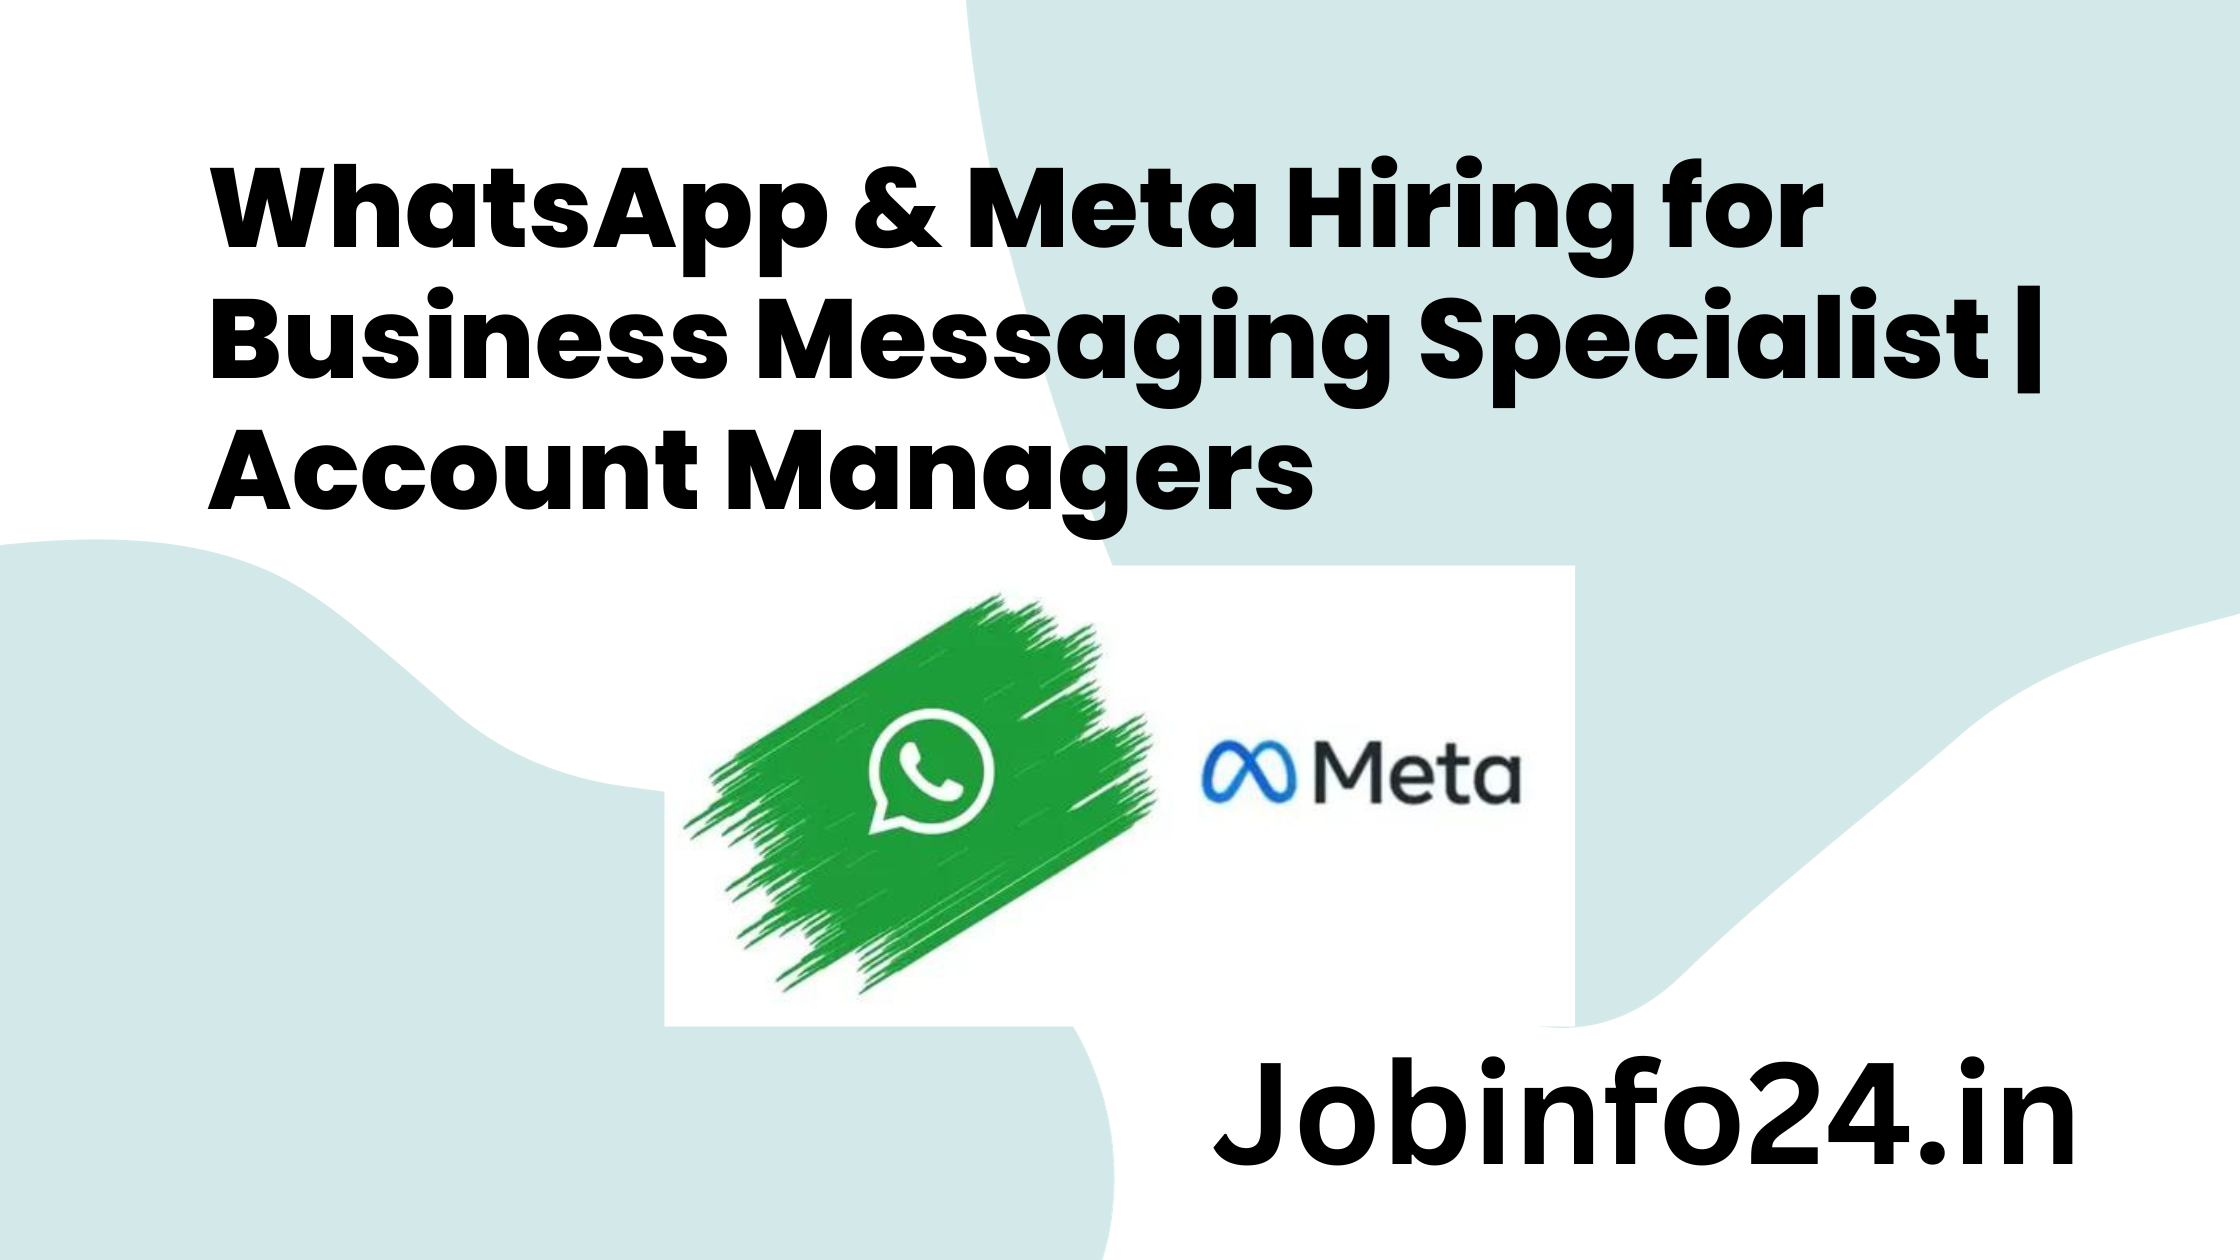 WhatsApp & Meta Hiring for Business Messaging Specialist | Account Managers